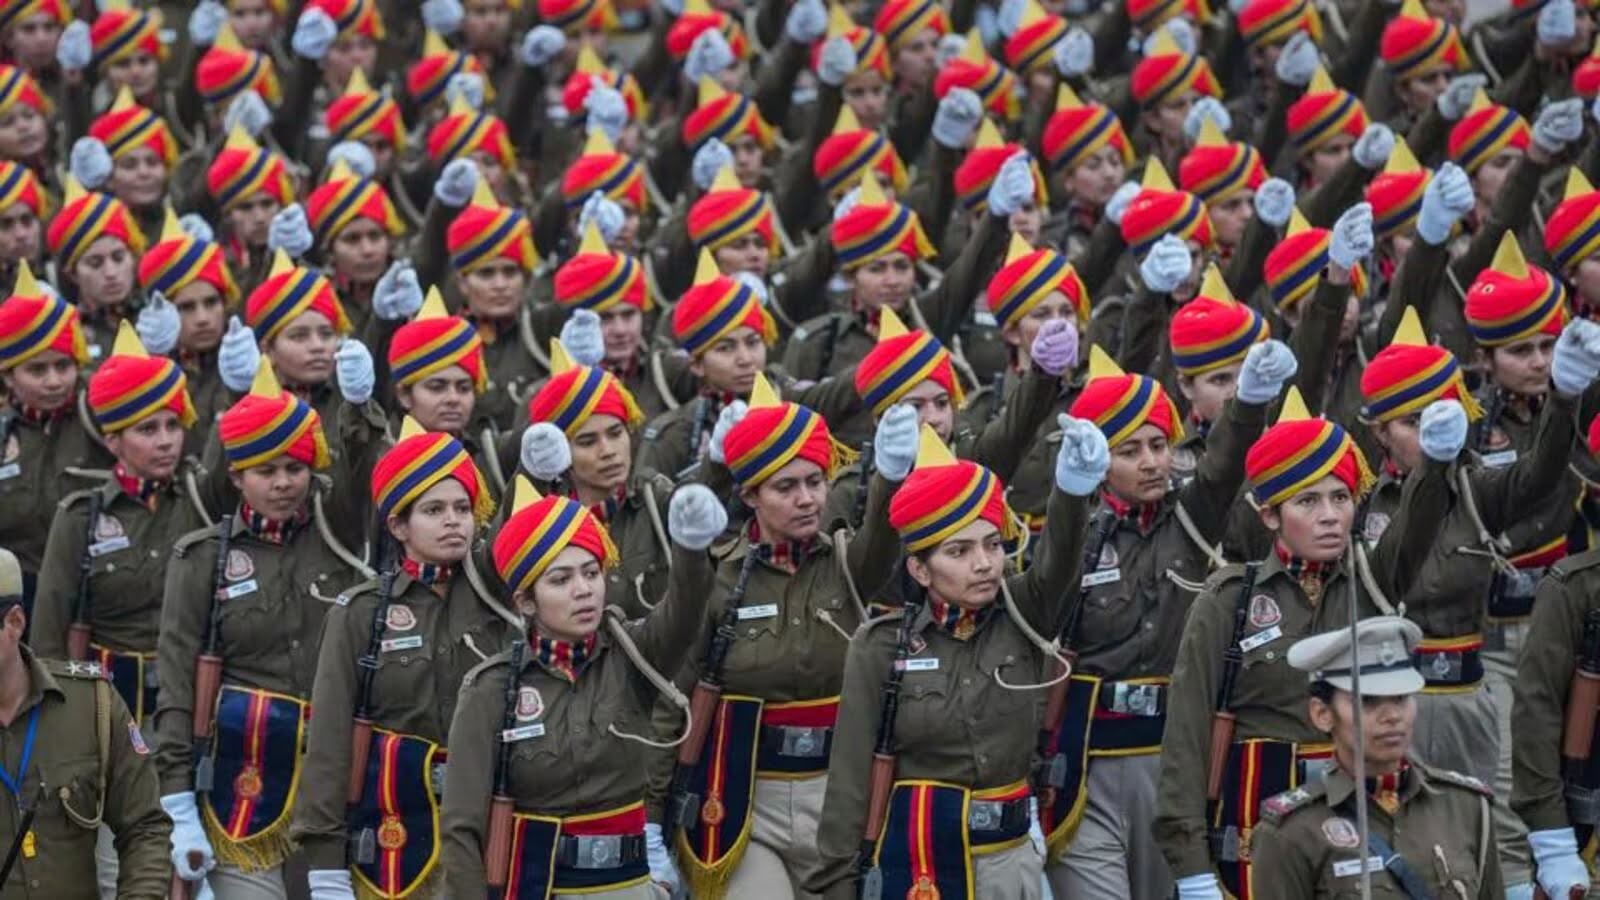 For the first time, this team of women will participate in the Republic Day parade